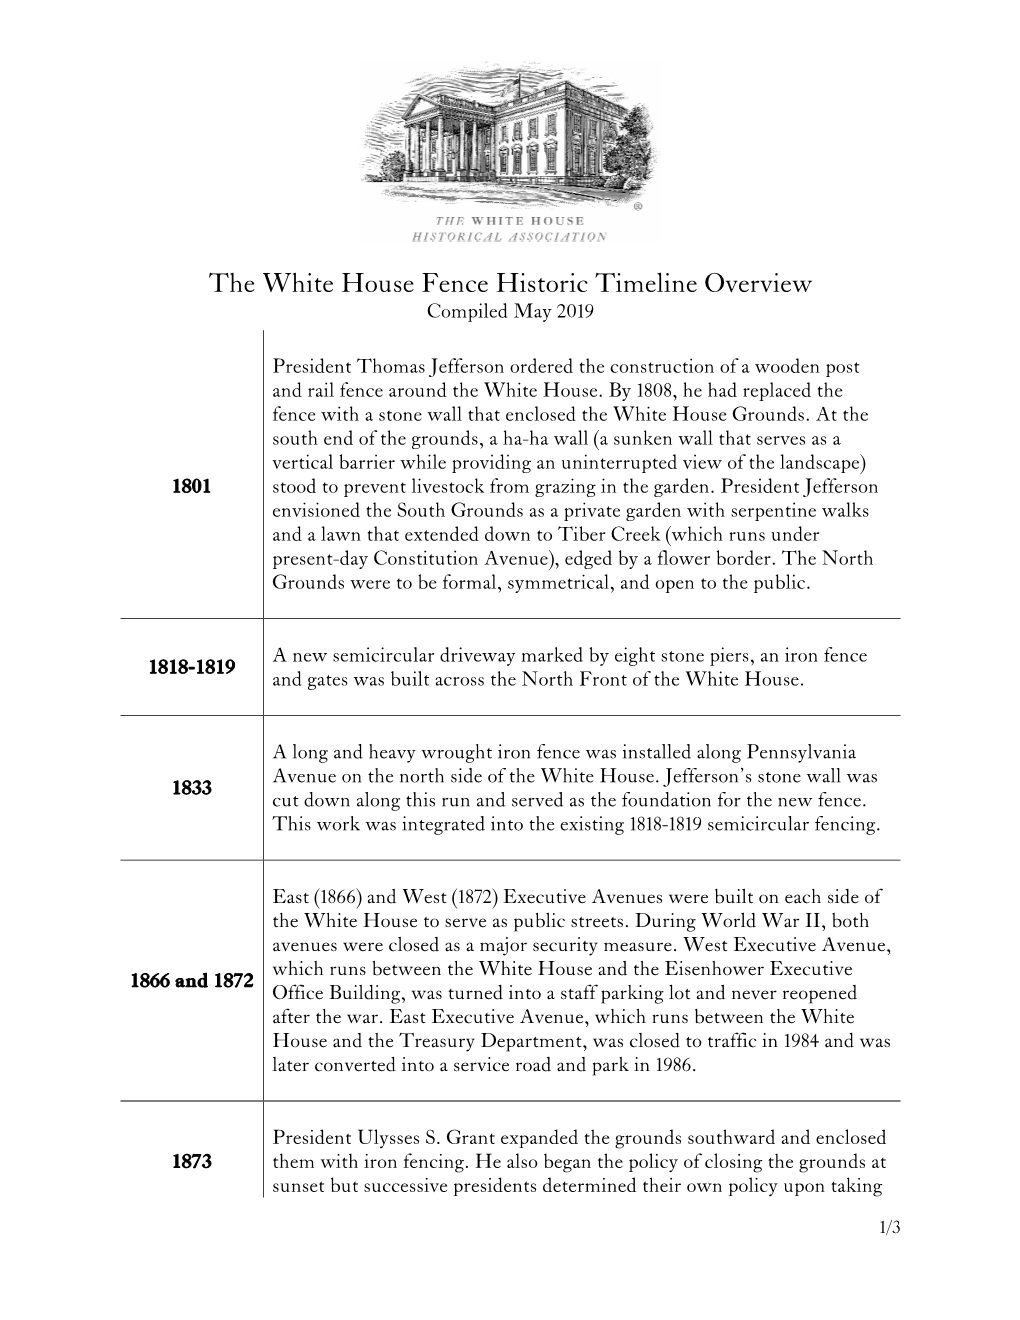 The White House Fence Historic Timeline Overview Compiled May 2019